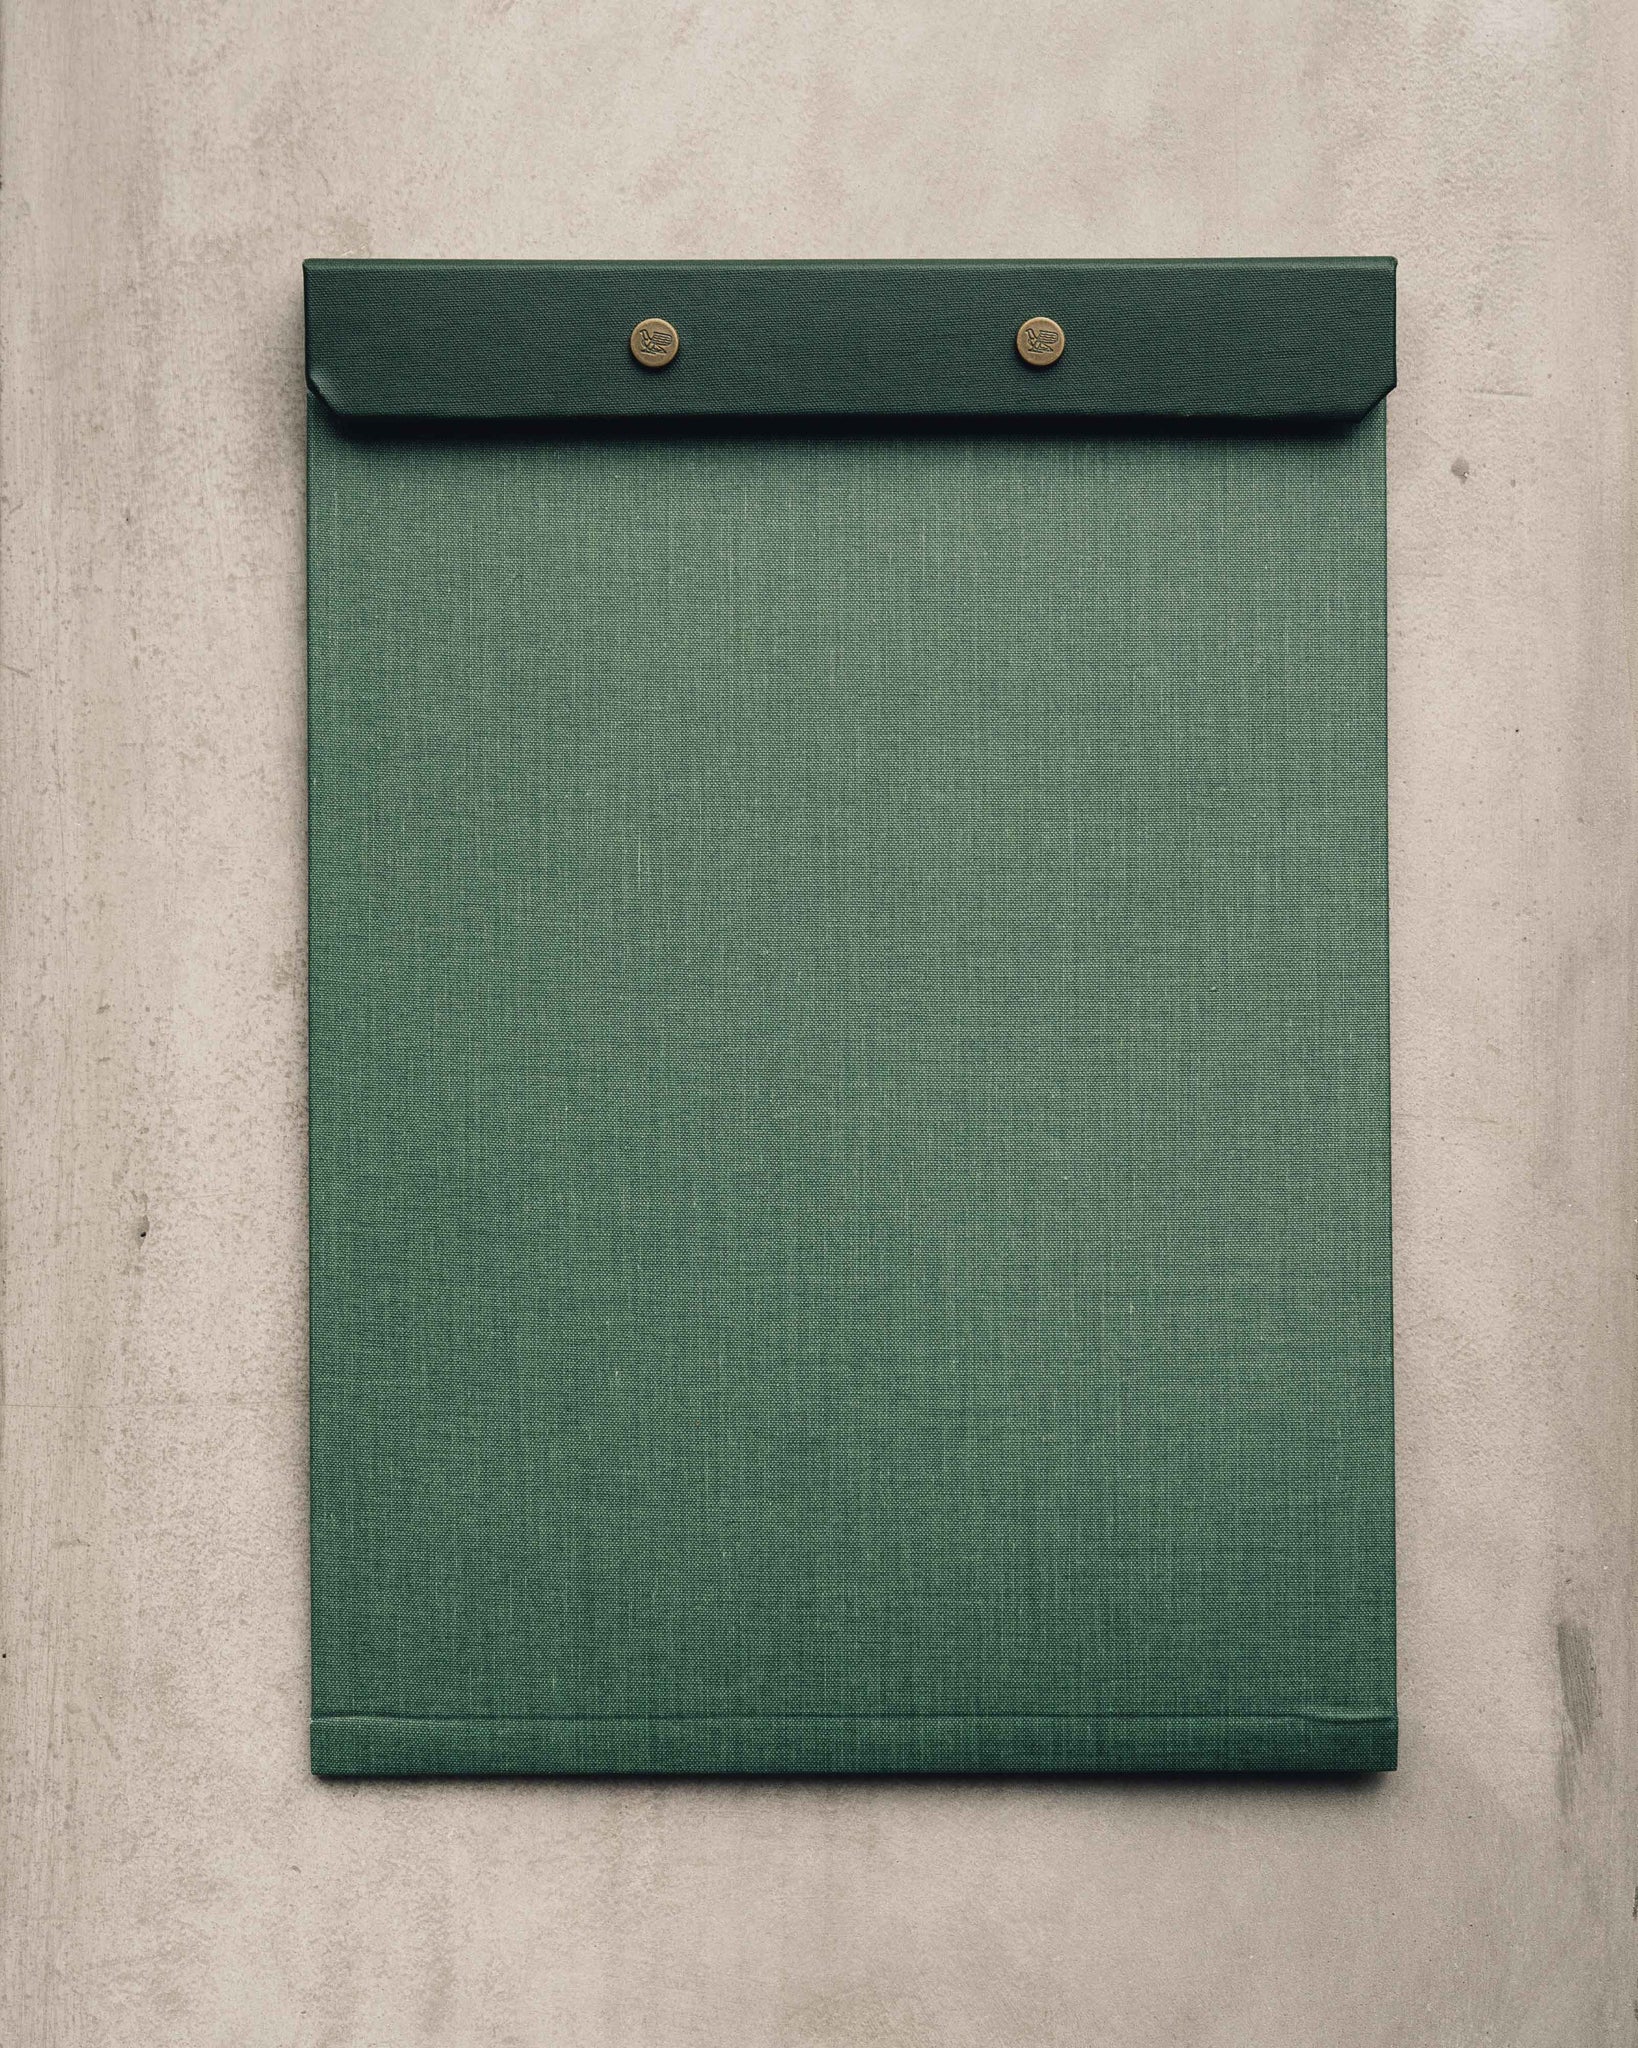 Postalco Snap Pad, Forest Green